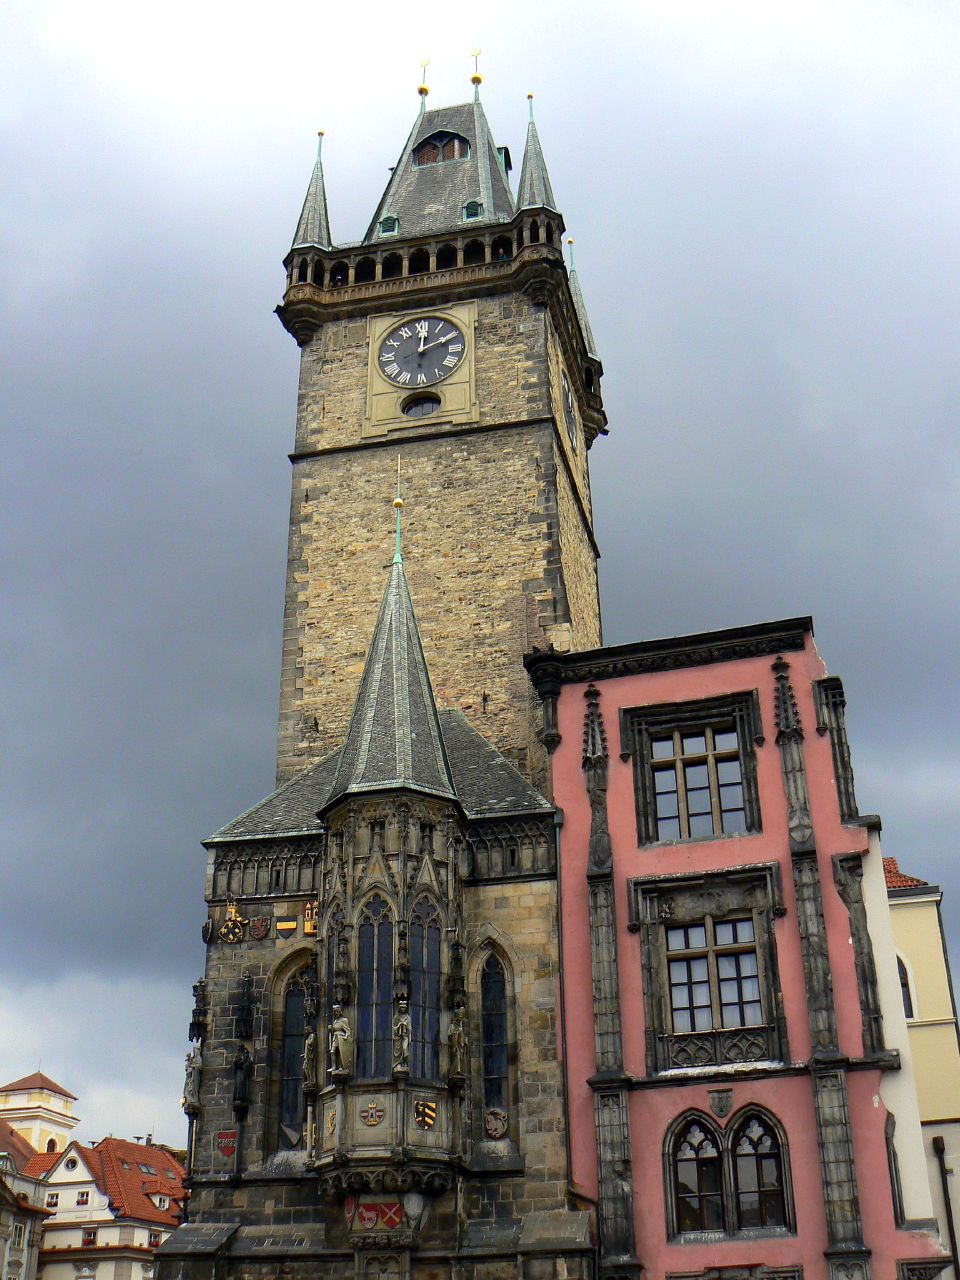 there is a very tall clock tower with windows